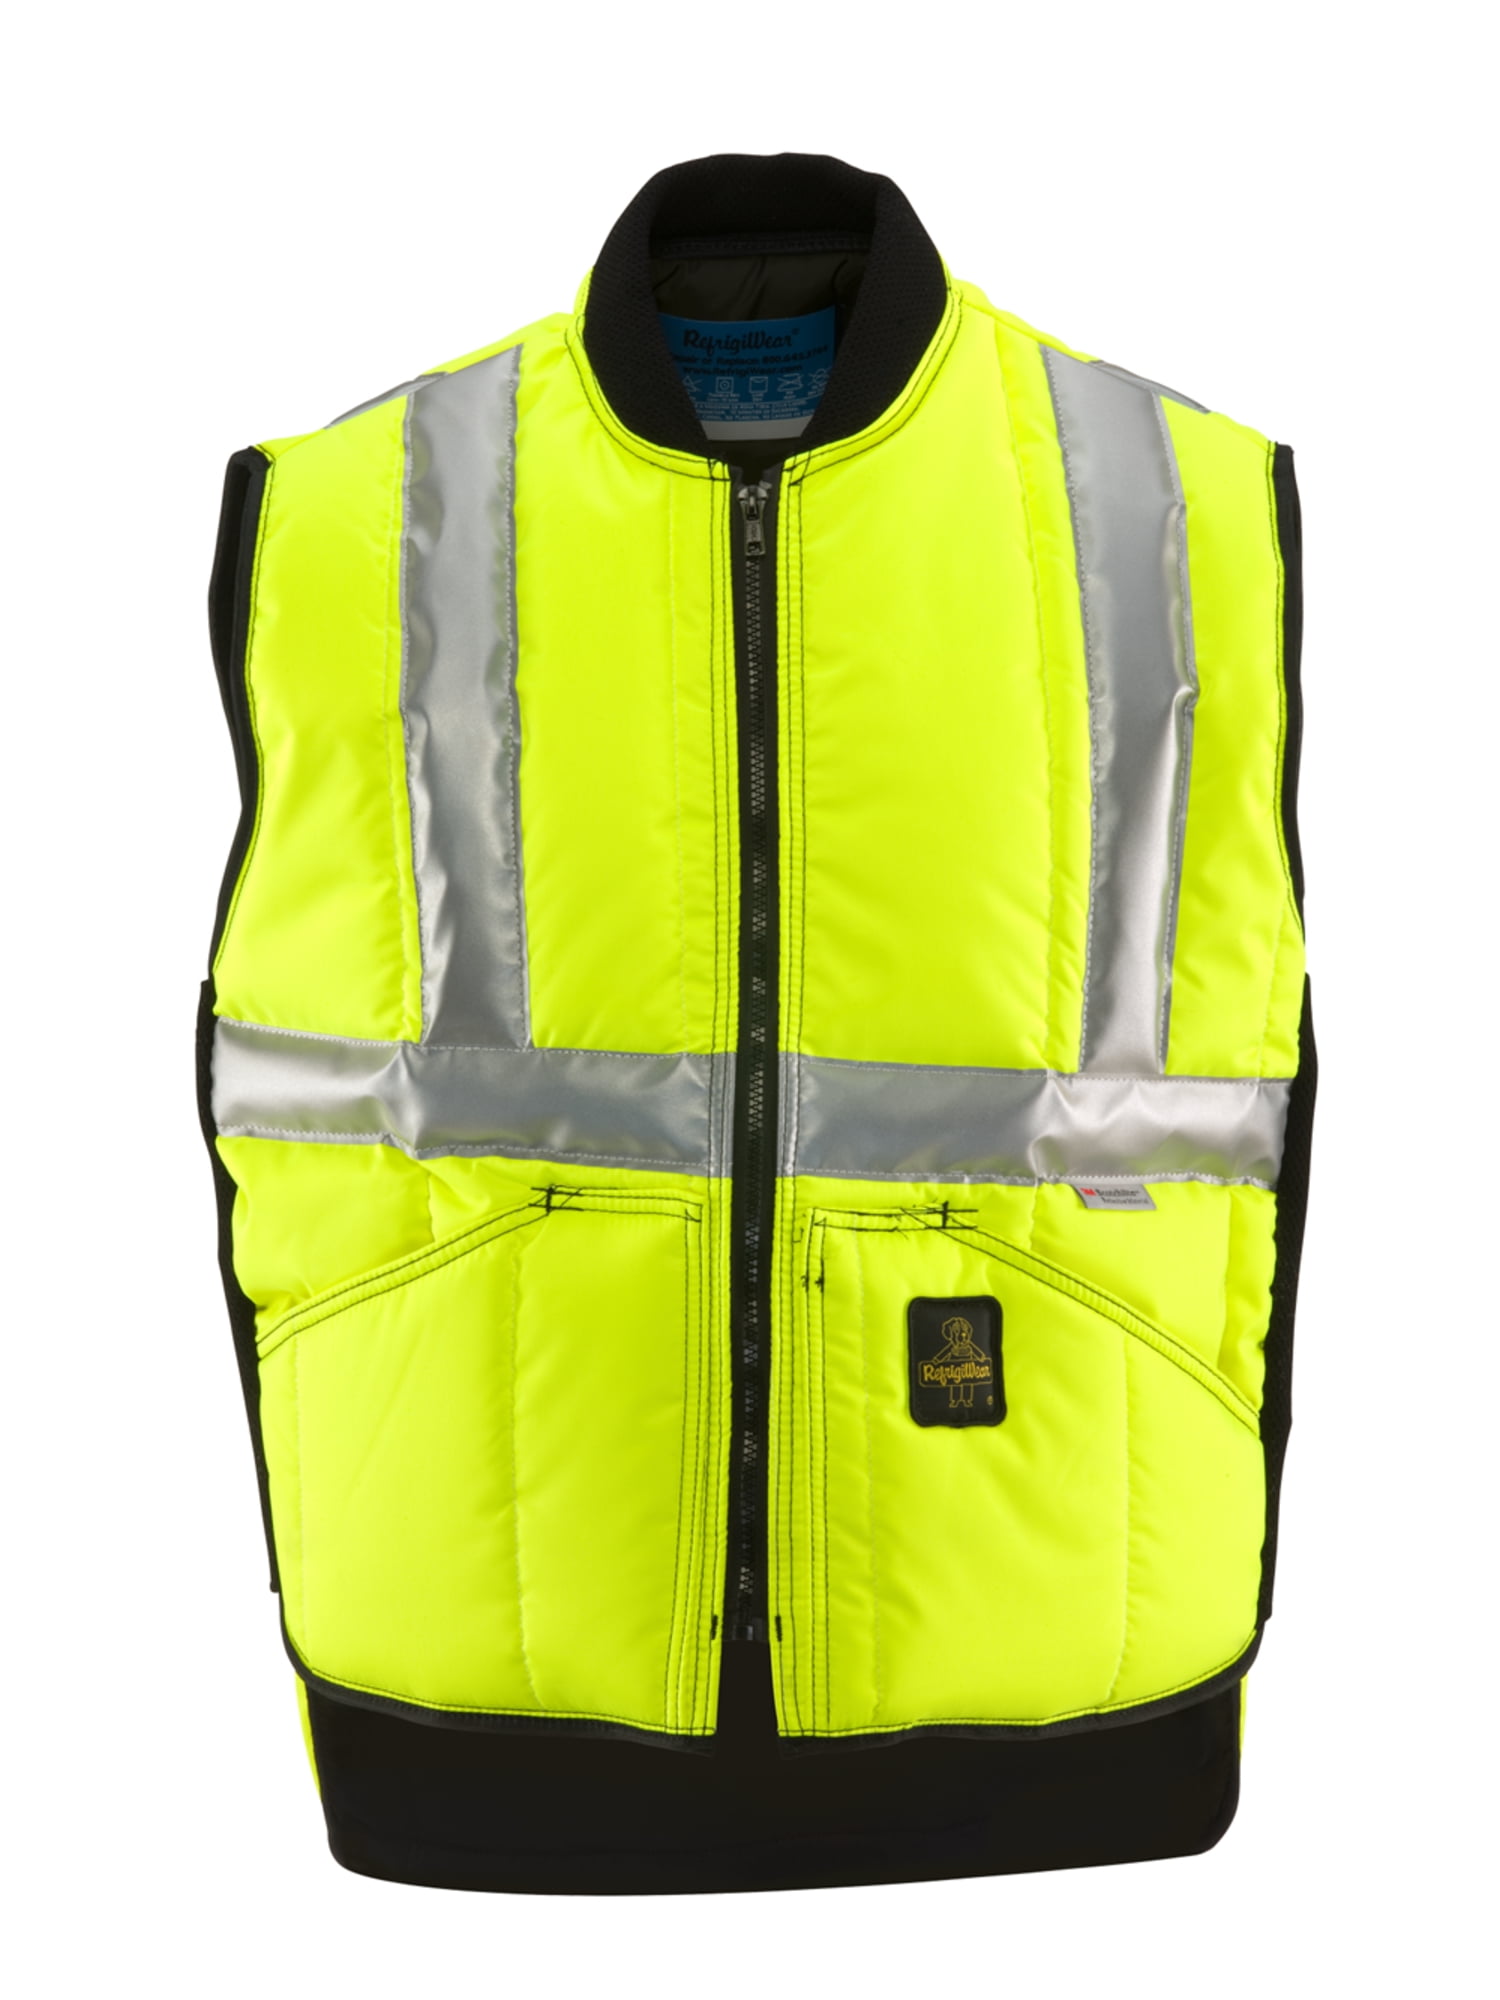 RefrigiWear Iron-Tuff High Visibility Insulated Safety Vest with ...